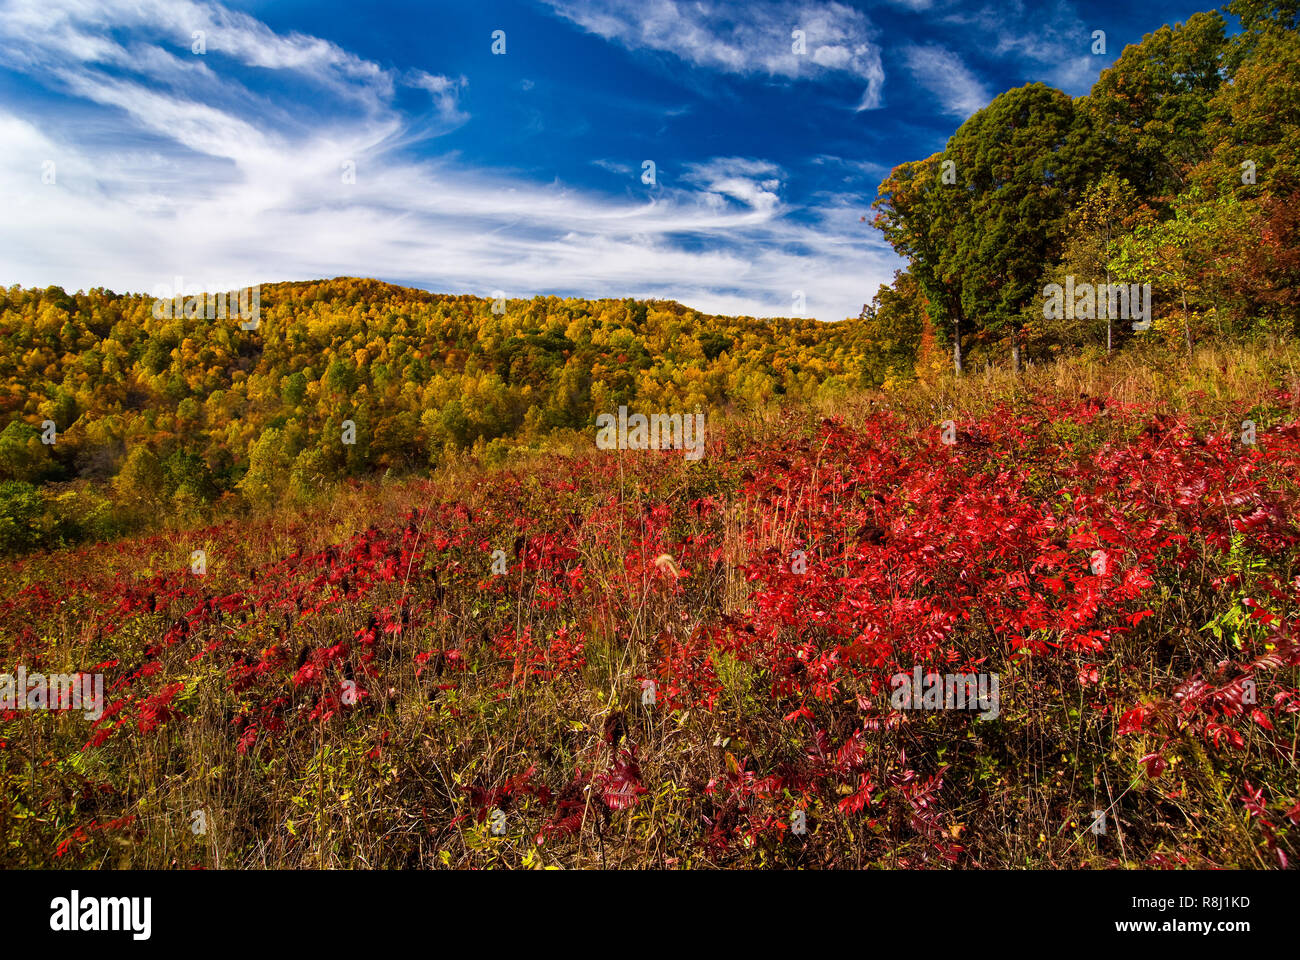 Red leaves of winged sumac (Rhus copallina) in foreground and yellow leaves of tulip poplar in forest contrast with blue sky in scene along Falls Lane Stock Photo